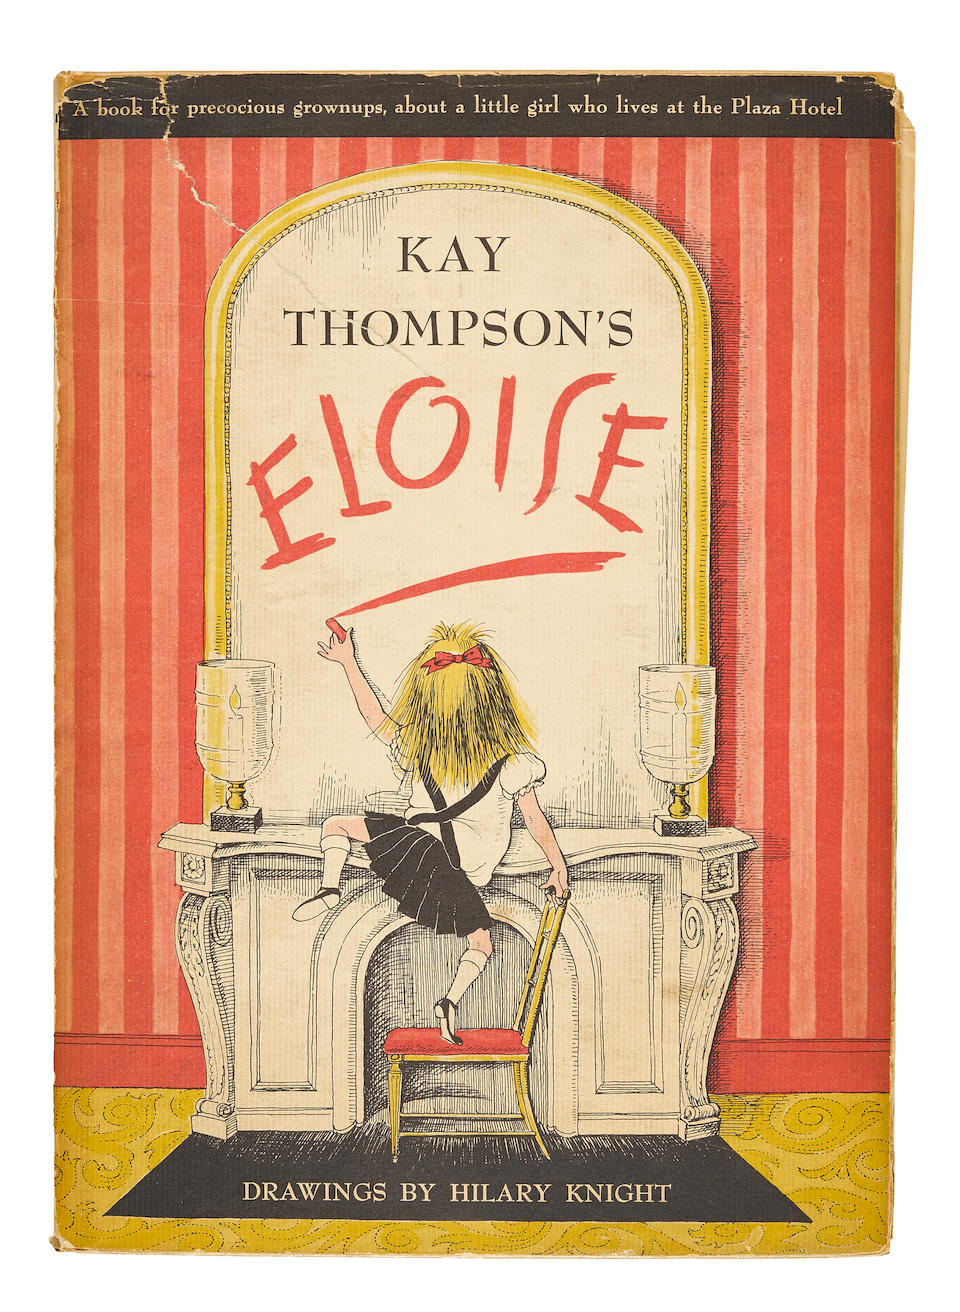 ELOISE, THE PRESENTATION COPY, INSCRIBED BY KAY THOMPSON TO HILARY KNIGHT. KNIGHT, HILARY, illus. Kay Thompson's Eloise.  New York: Simon and Schuster, 1955.